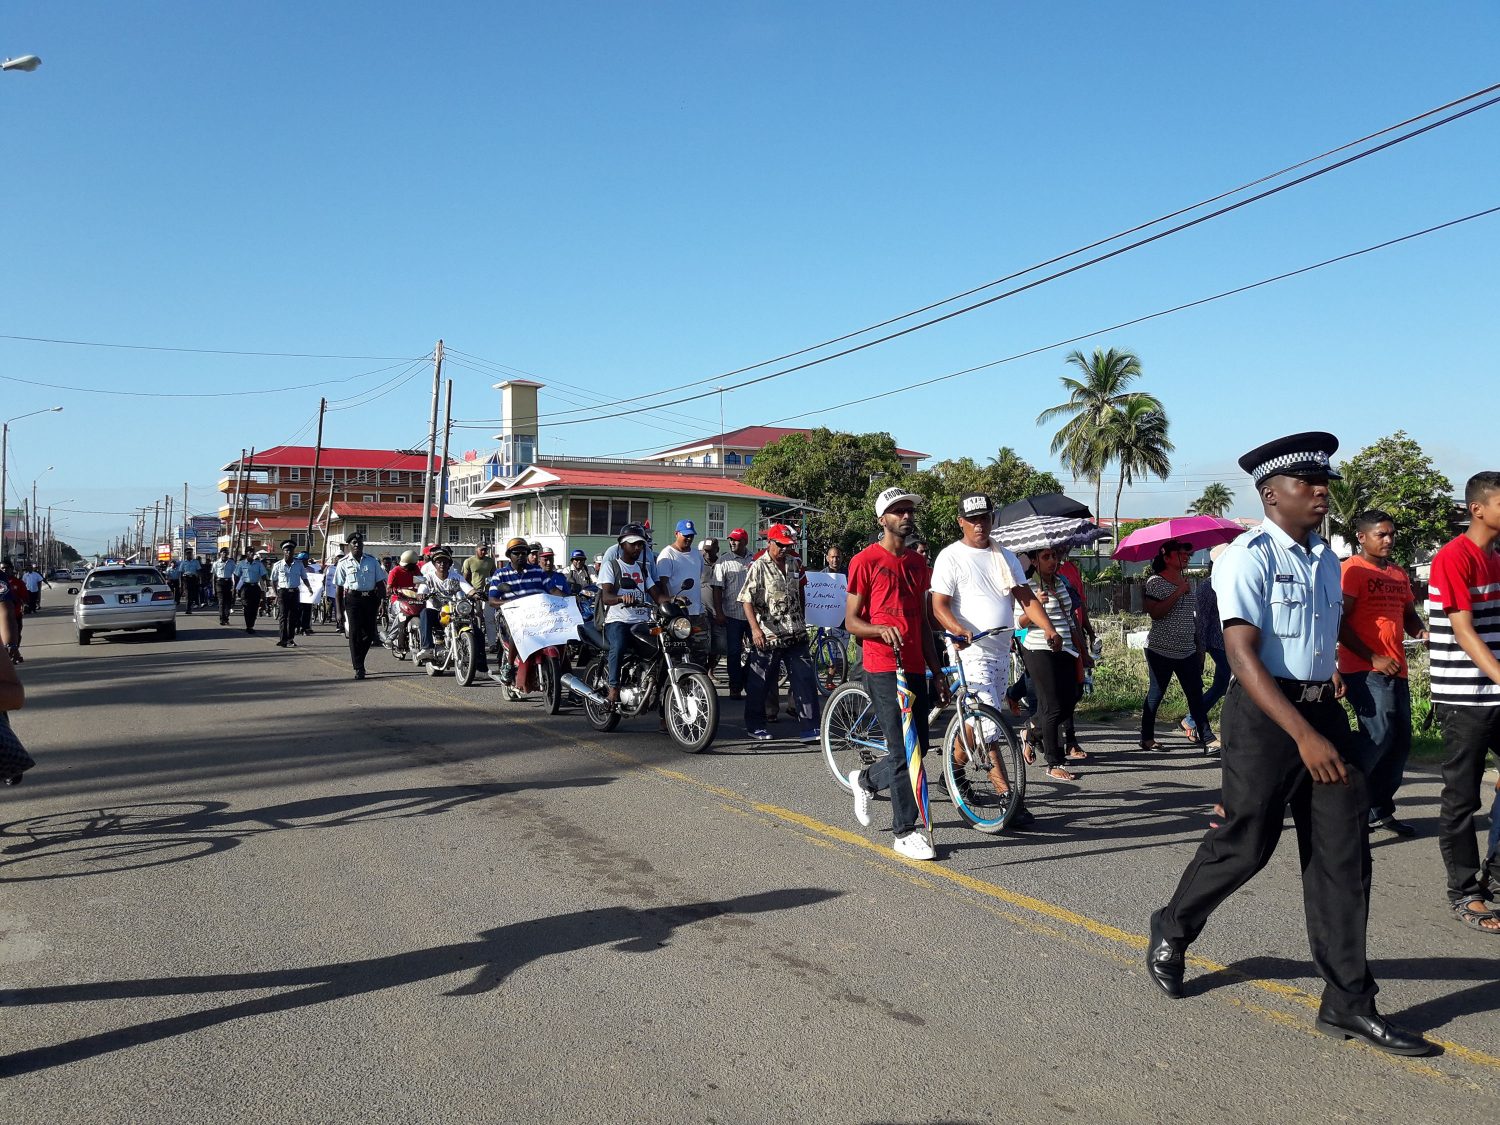 There was a significant police presence at the Skeldon protest yesterday by laid-off sugar workers.